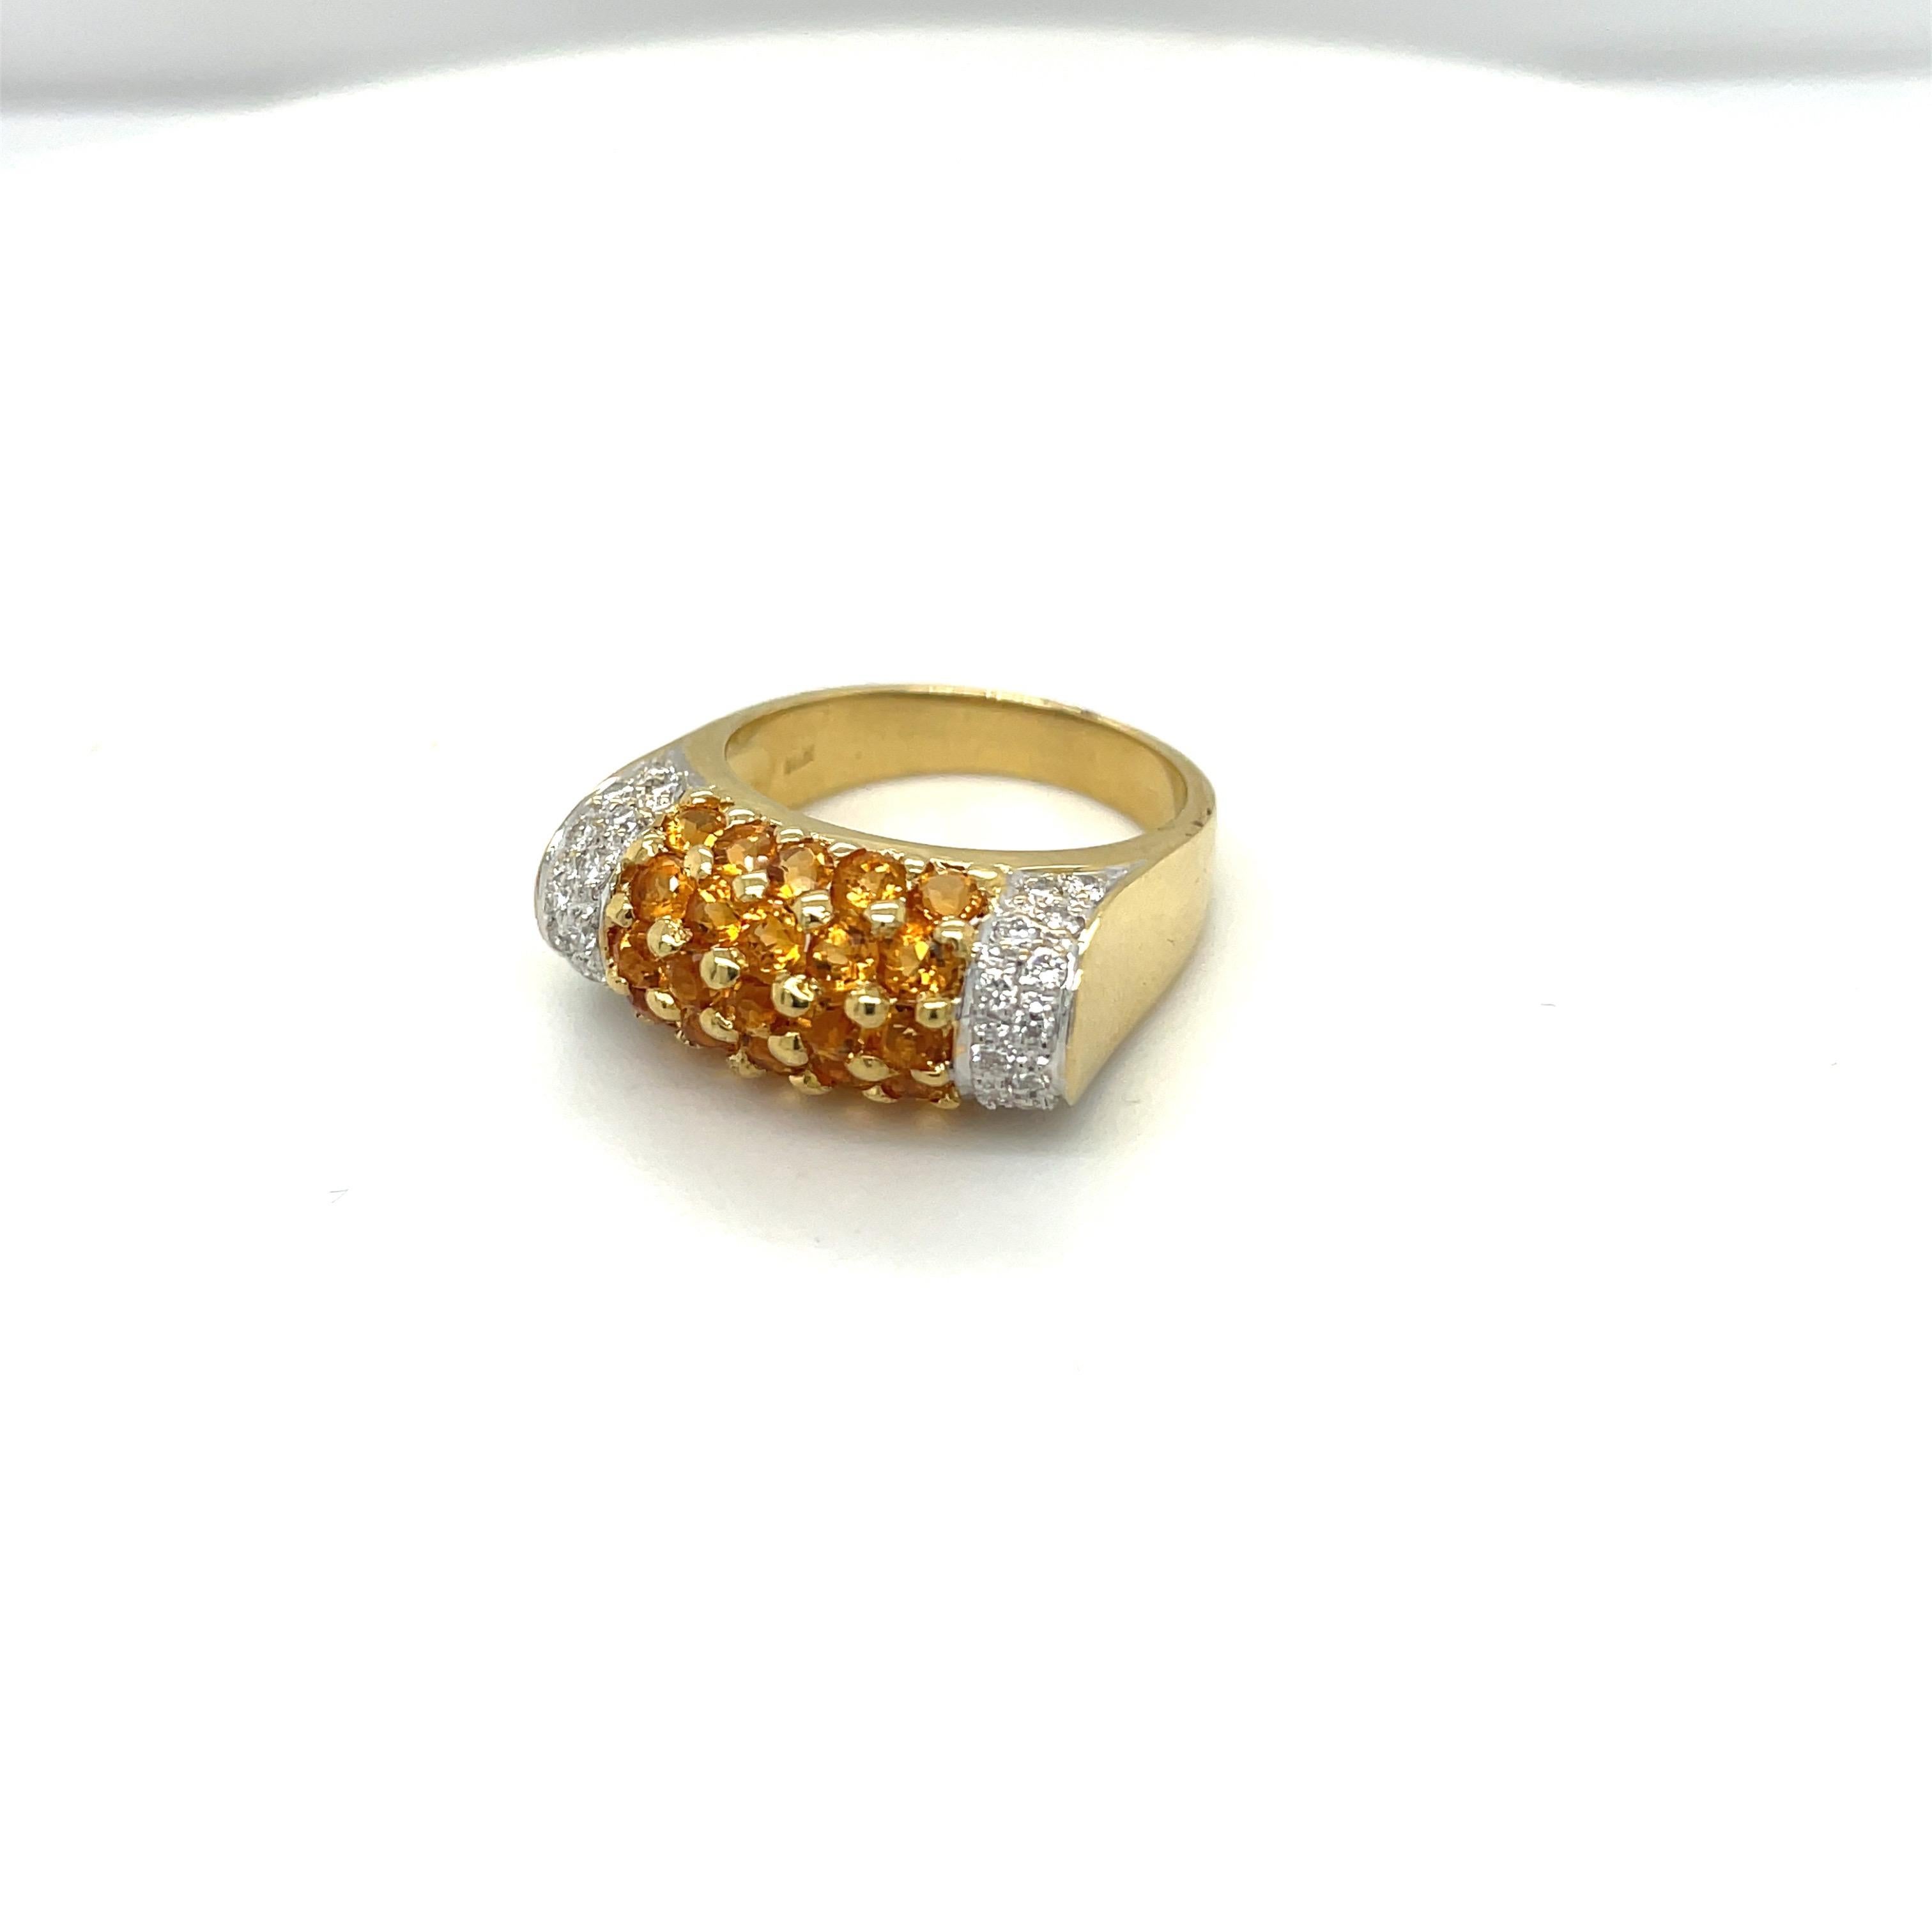 A very easy to wear 18 karat yellow gold ring. The ring is set wit with 25 round citrines weighing 1.50 carats and 30 round brilliant diamonds weighing 0.43 carats.
Finger size 7
Stamped 750 18K
Cellini Jewelers NYC